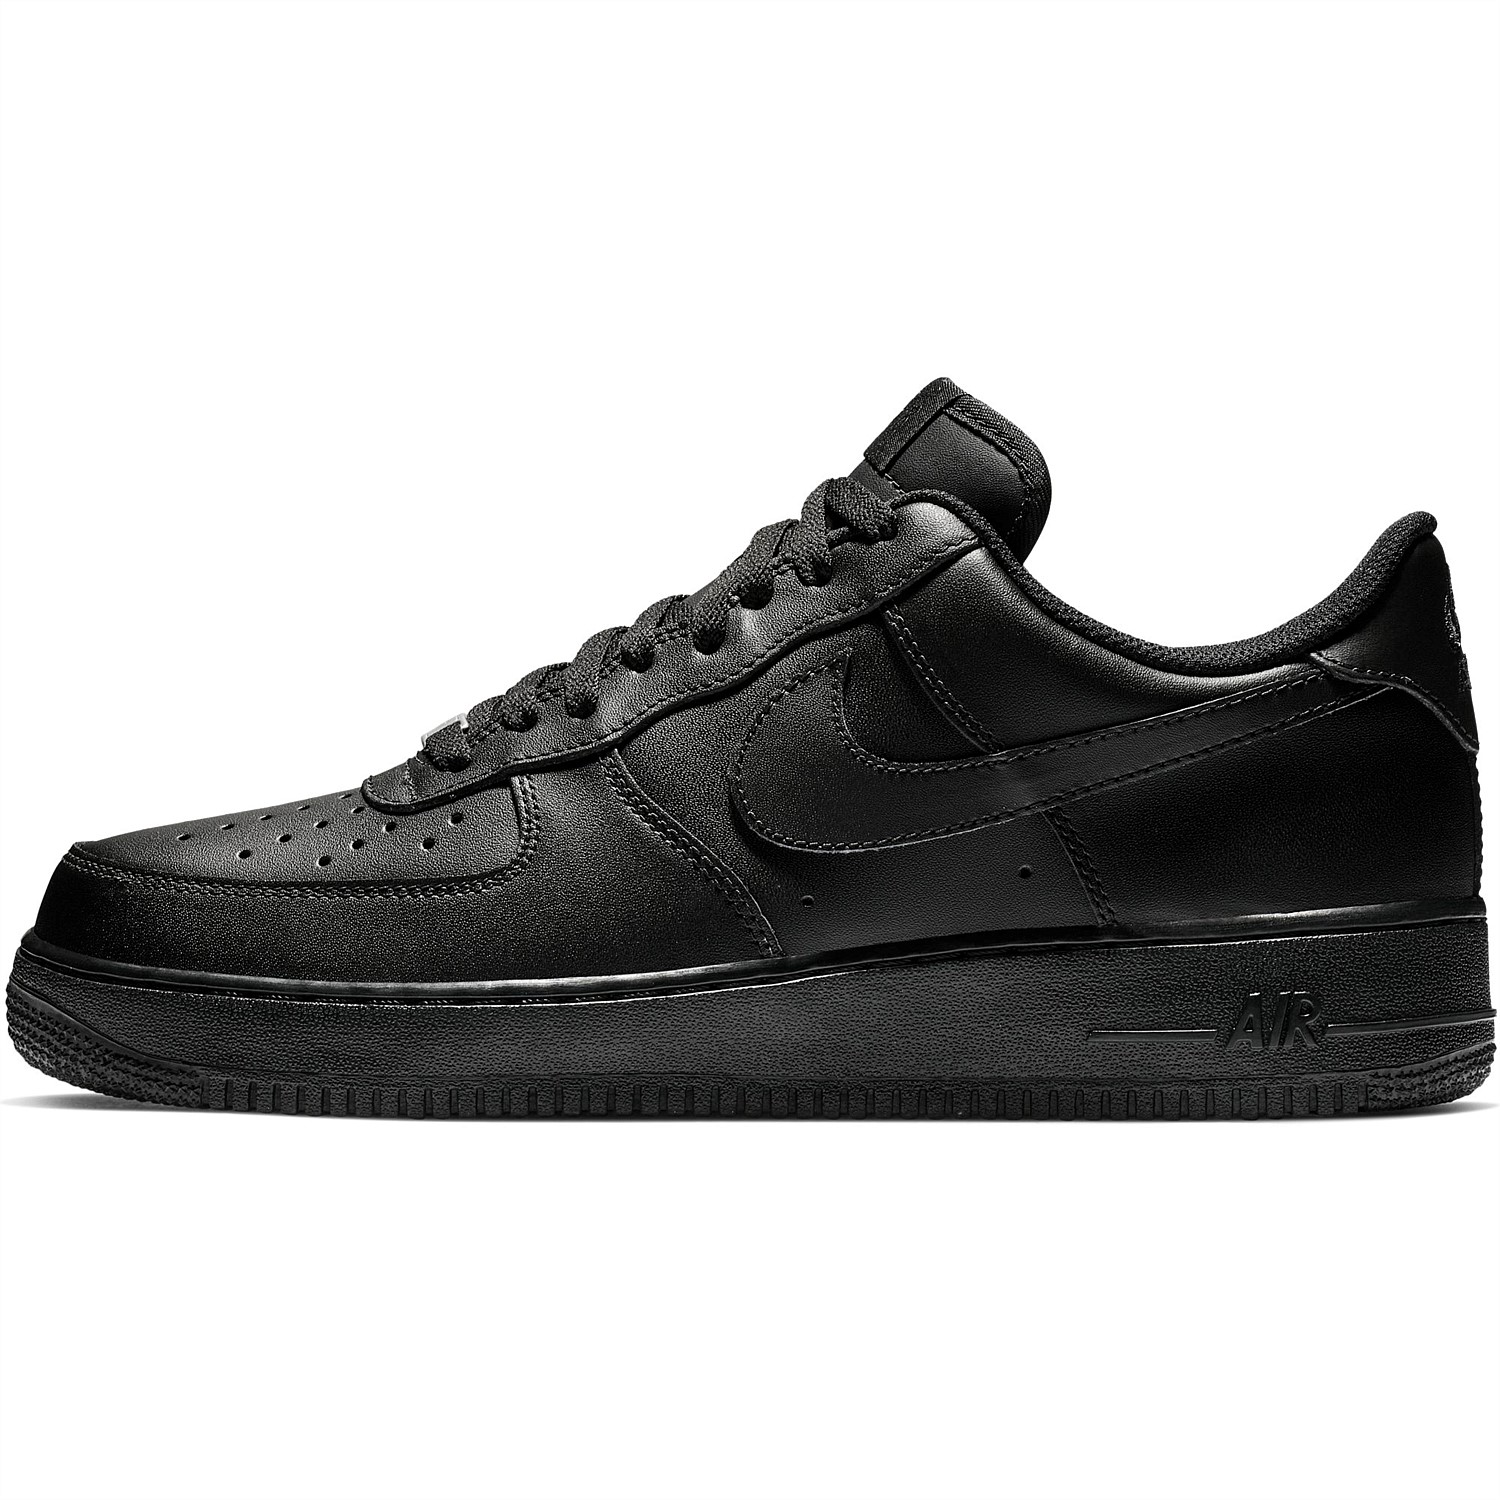 stirling sports nike air force 1